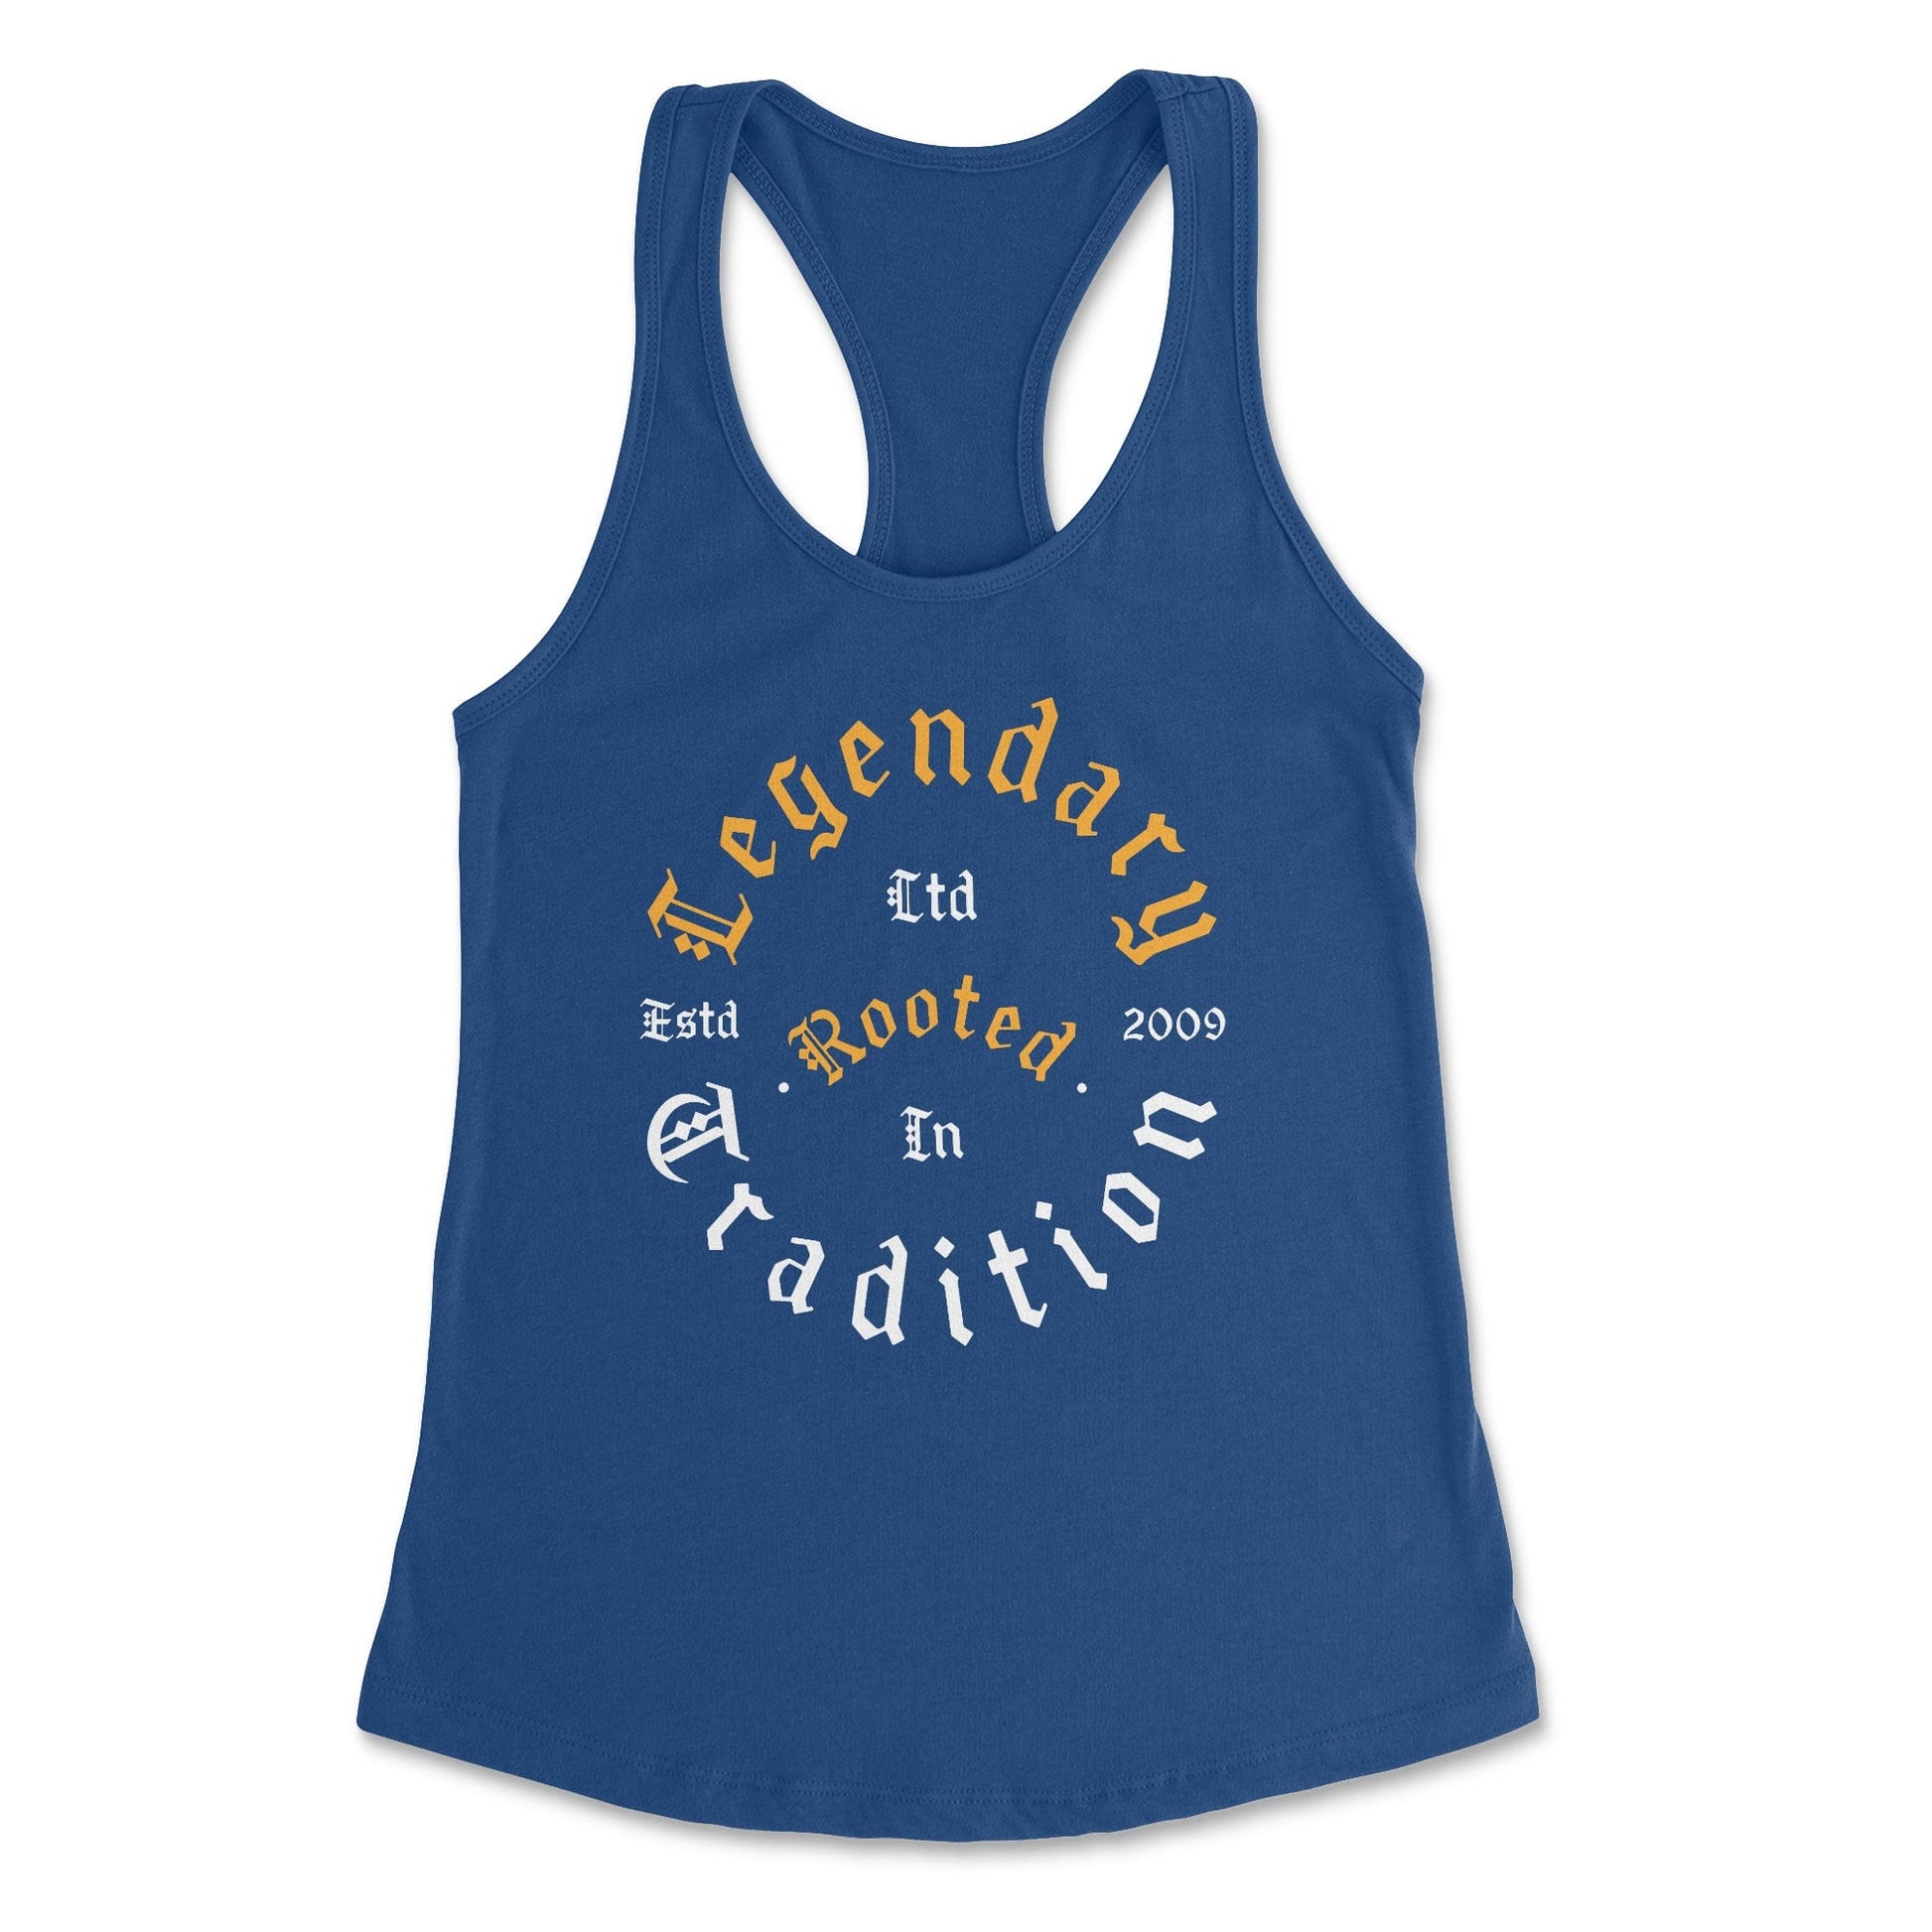 Legendary ltd. "Rooted in Tradition" Racerback Tank by Tim Dalton